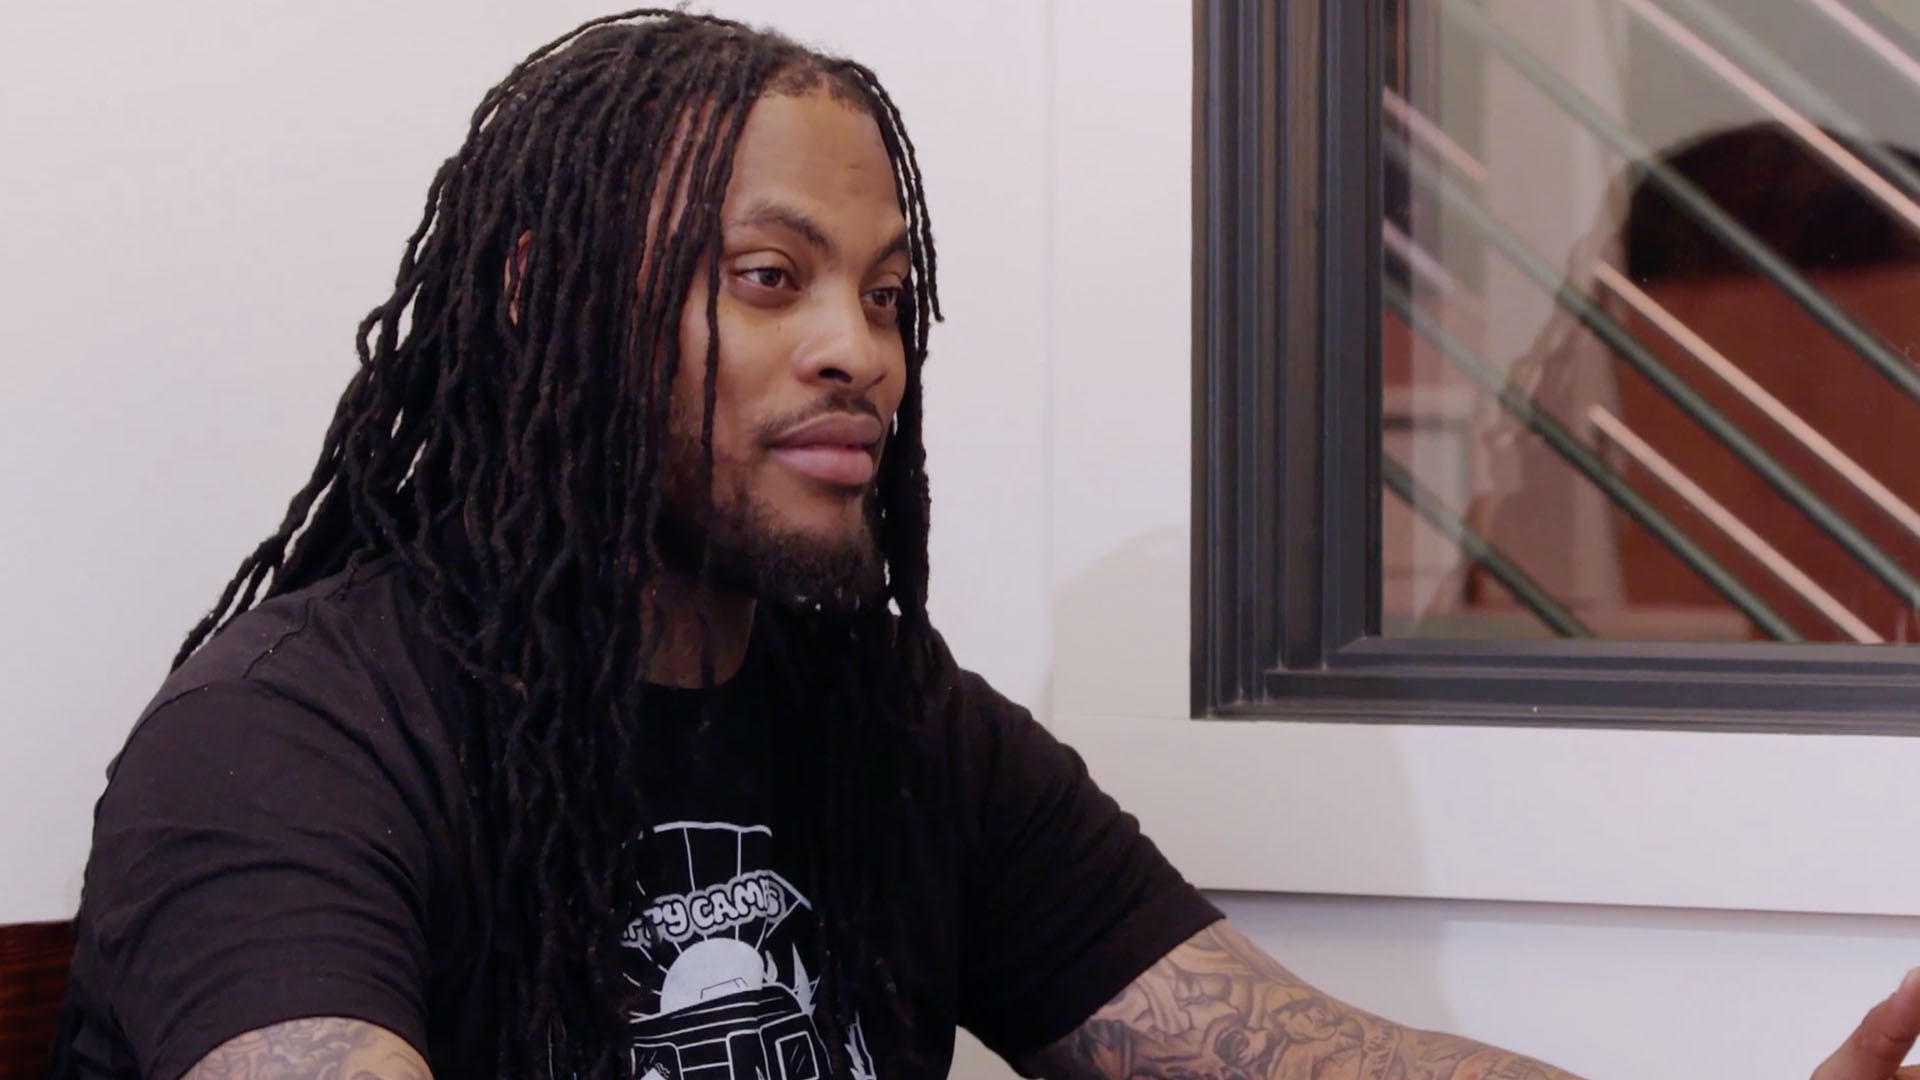 Waka Has His Own View of Parenting